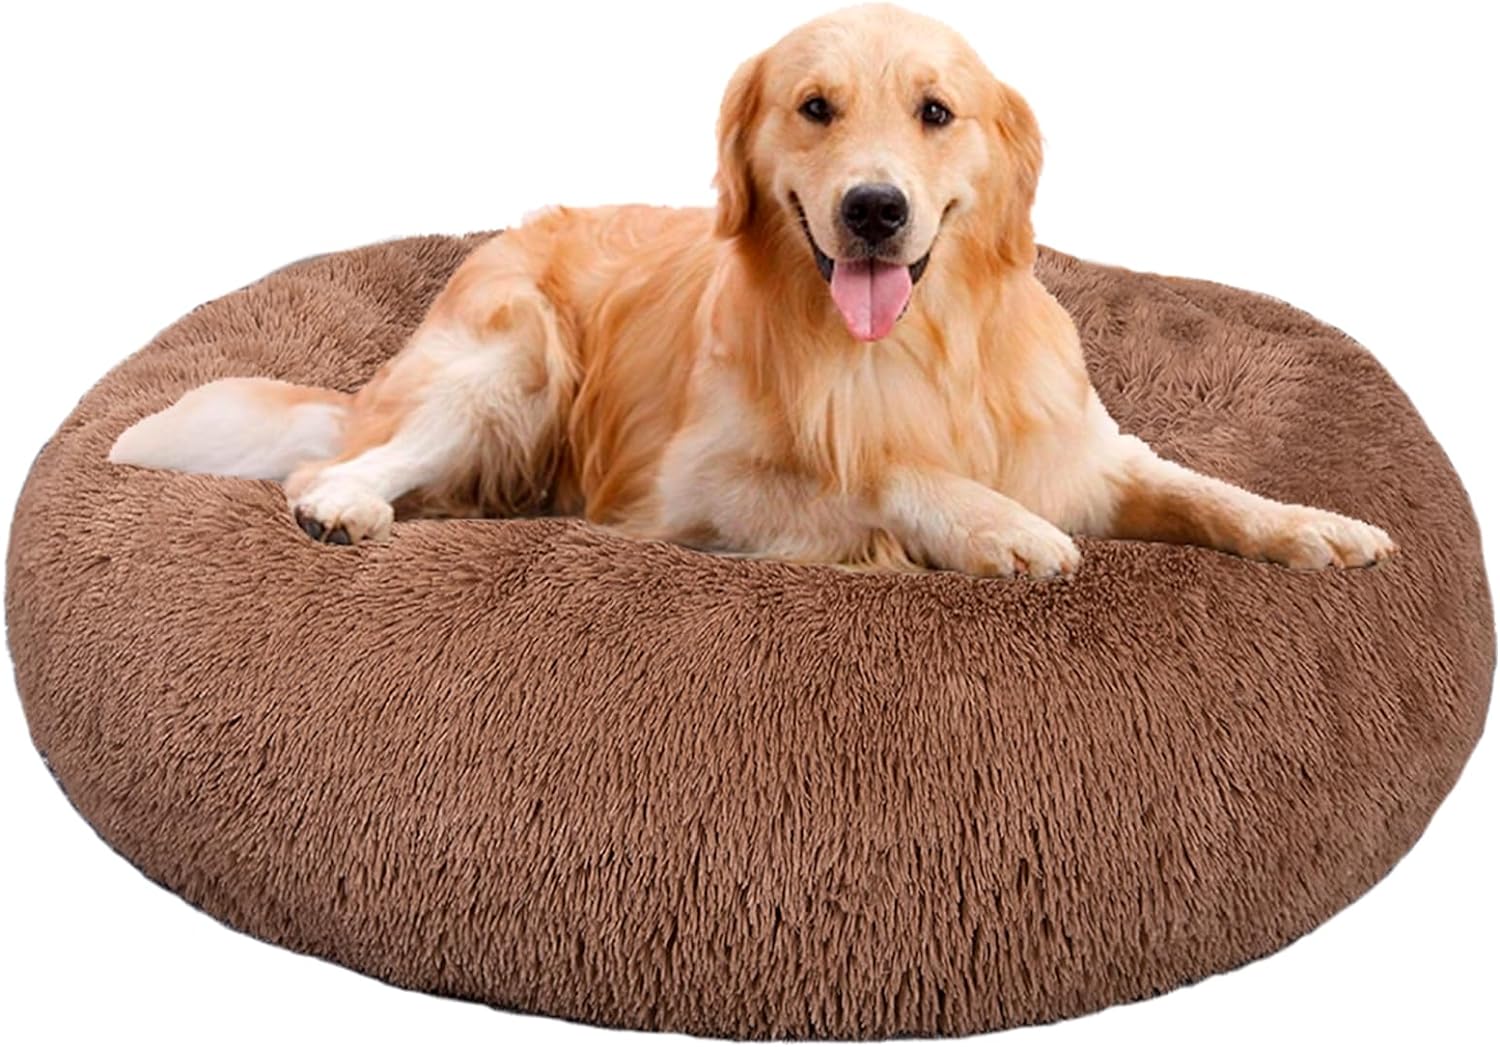 WELLYELO Calming Dog Bed, 30In Donut Dog Bed, Anti Anxiety Dog Bed Cat Bed, Machine Washable Fluffy Plush Round Dog Beds for Large Extra Large Dogs Cats (Large, Brown)